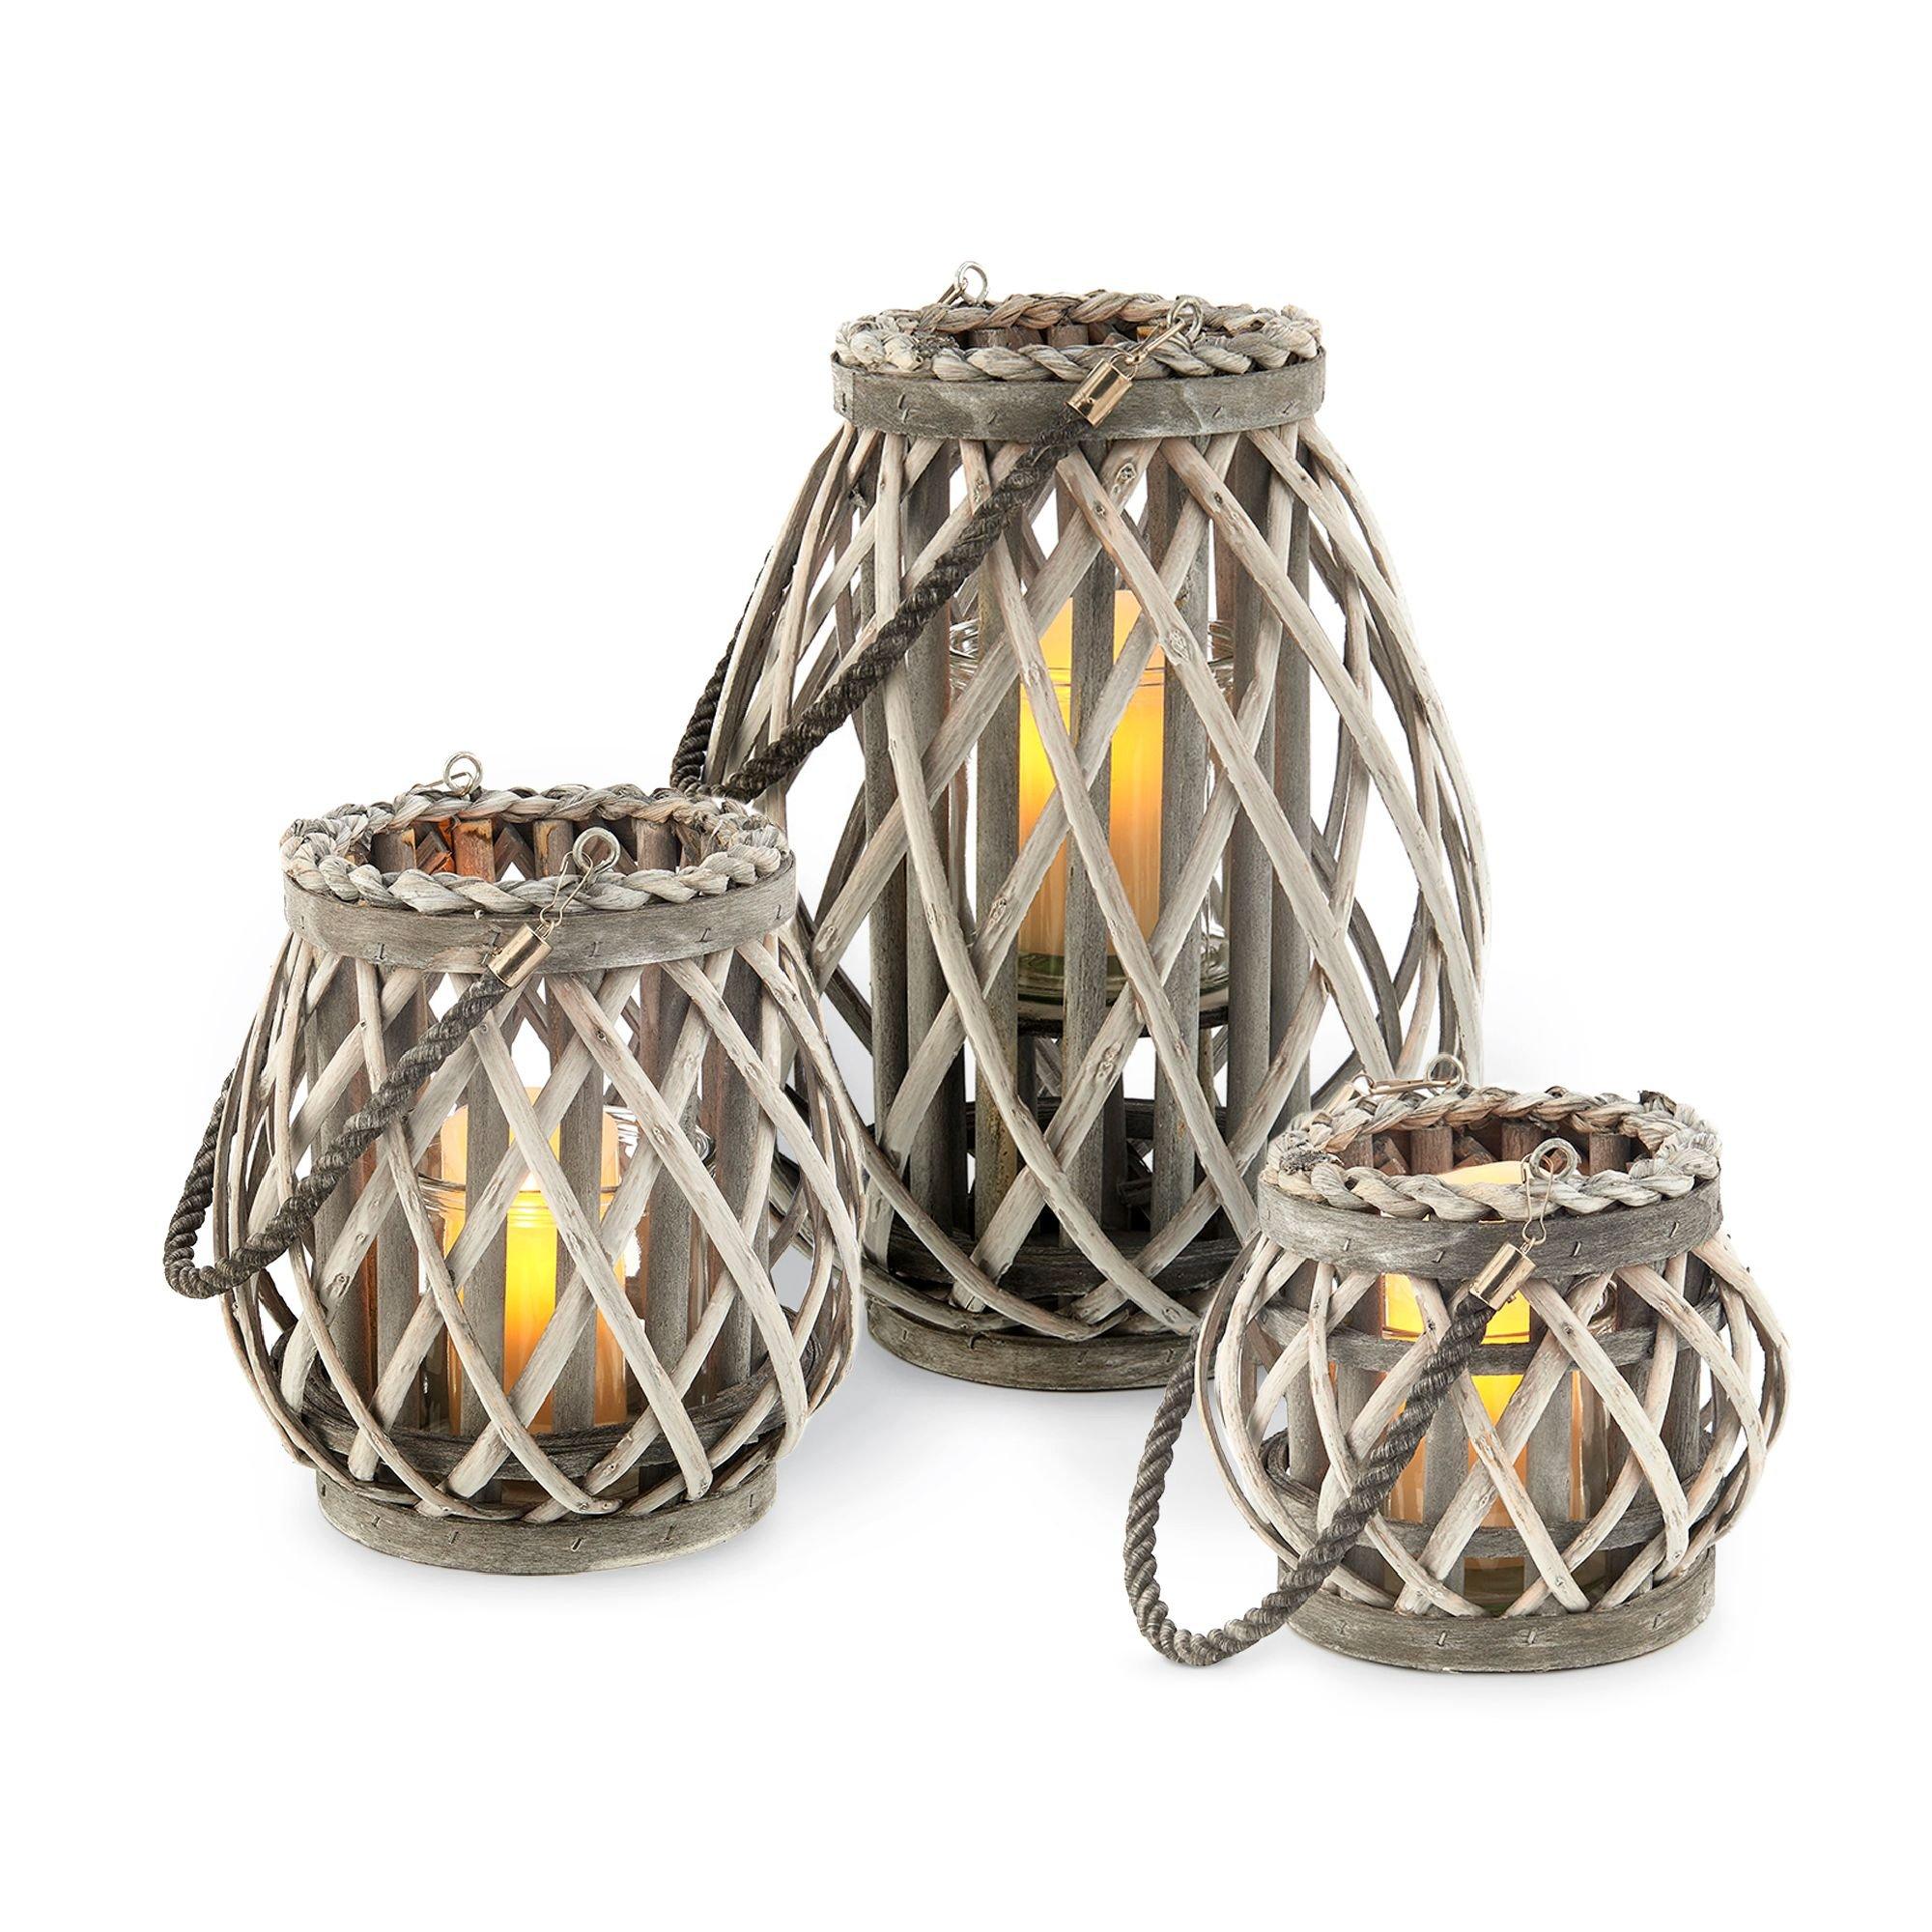 3pc Wicker Willow Candle Lantern Basket Jar - Made from Hemp Rope & Willow Twigs